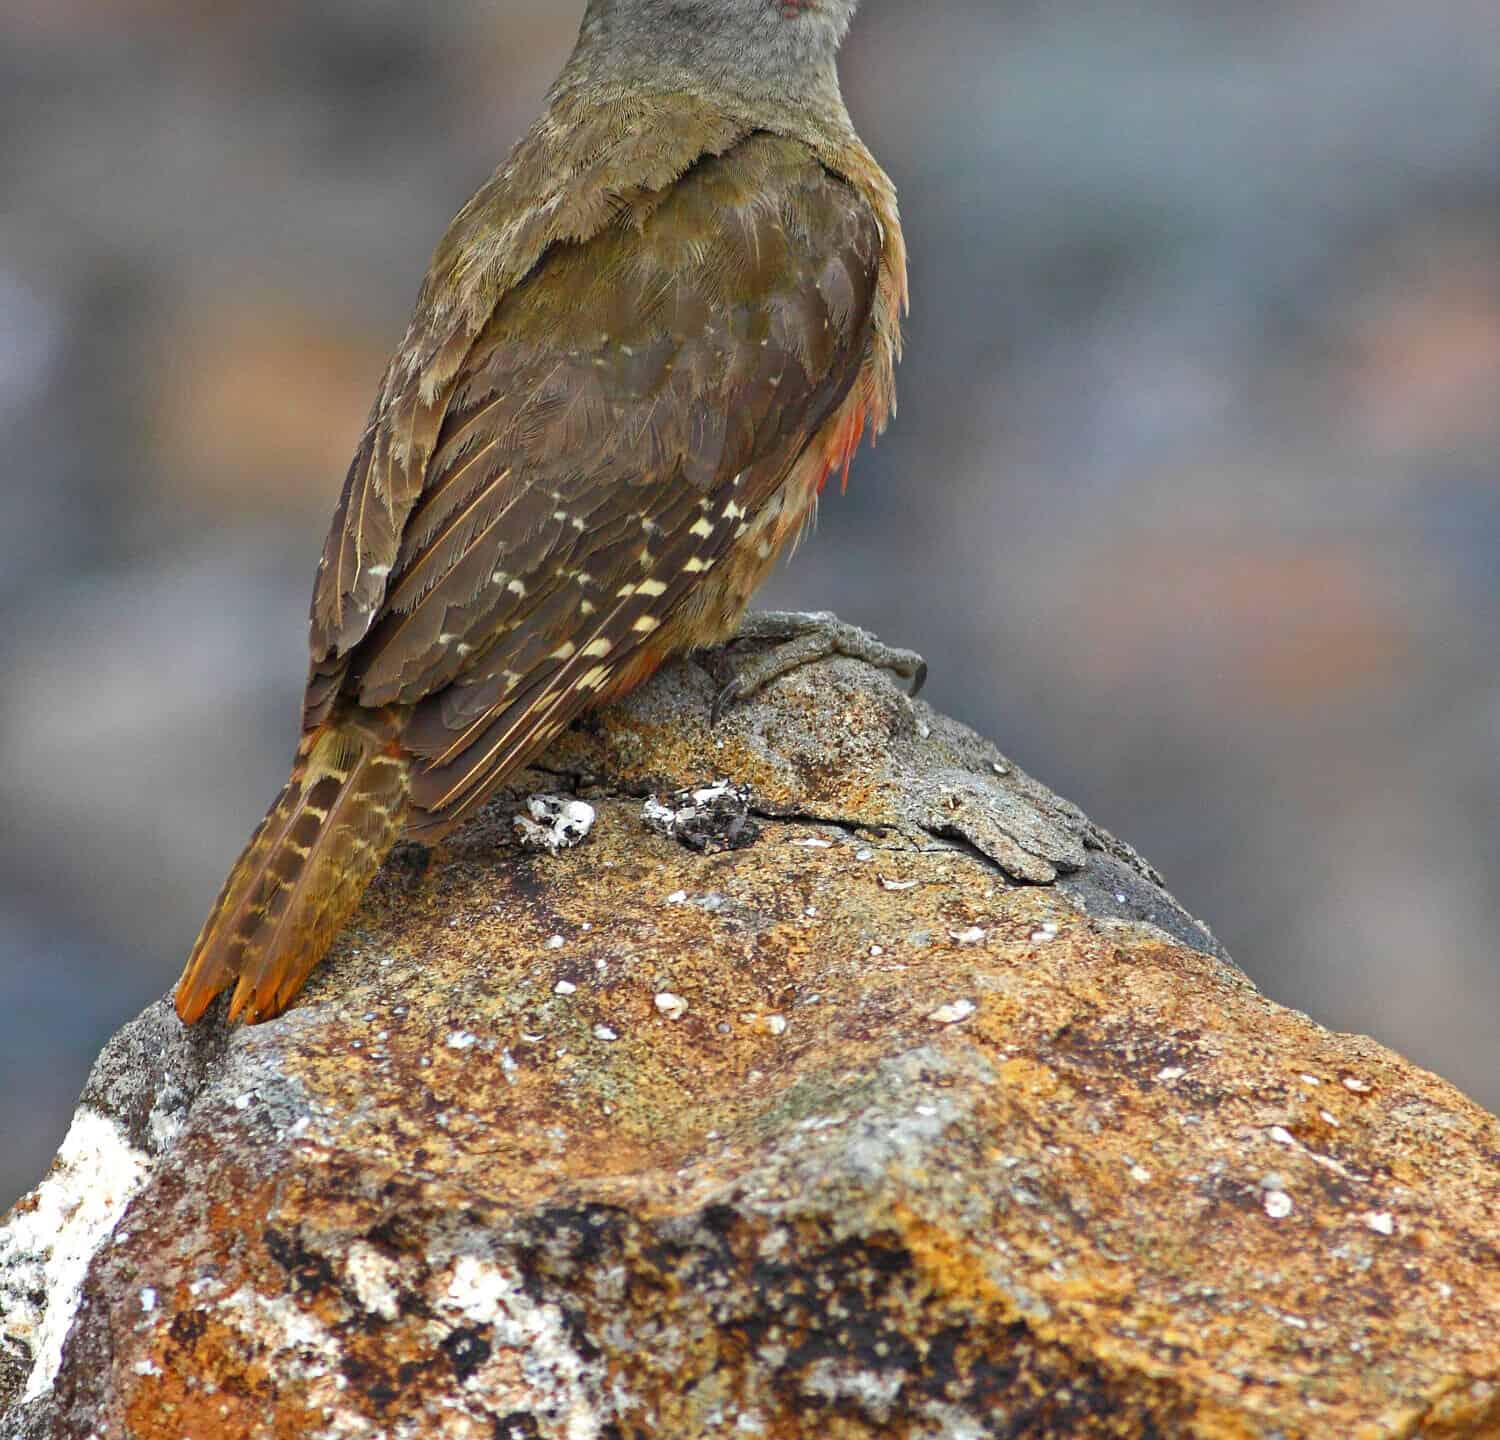 An endemic ground woodpecker (Geocolaptes olivaceus) is watching on a rock in the Drakensberg mountains, South Africa